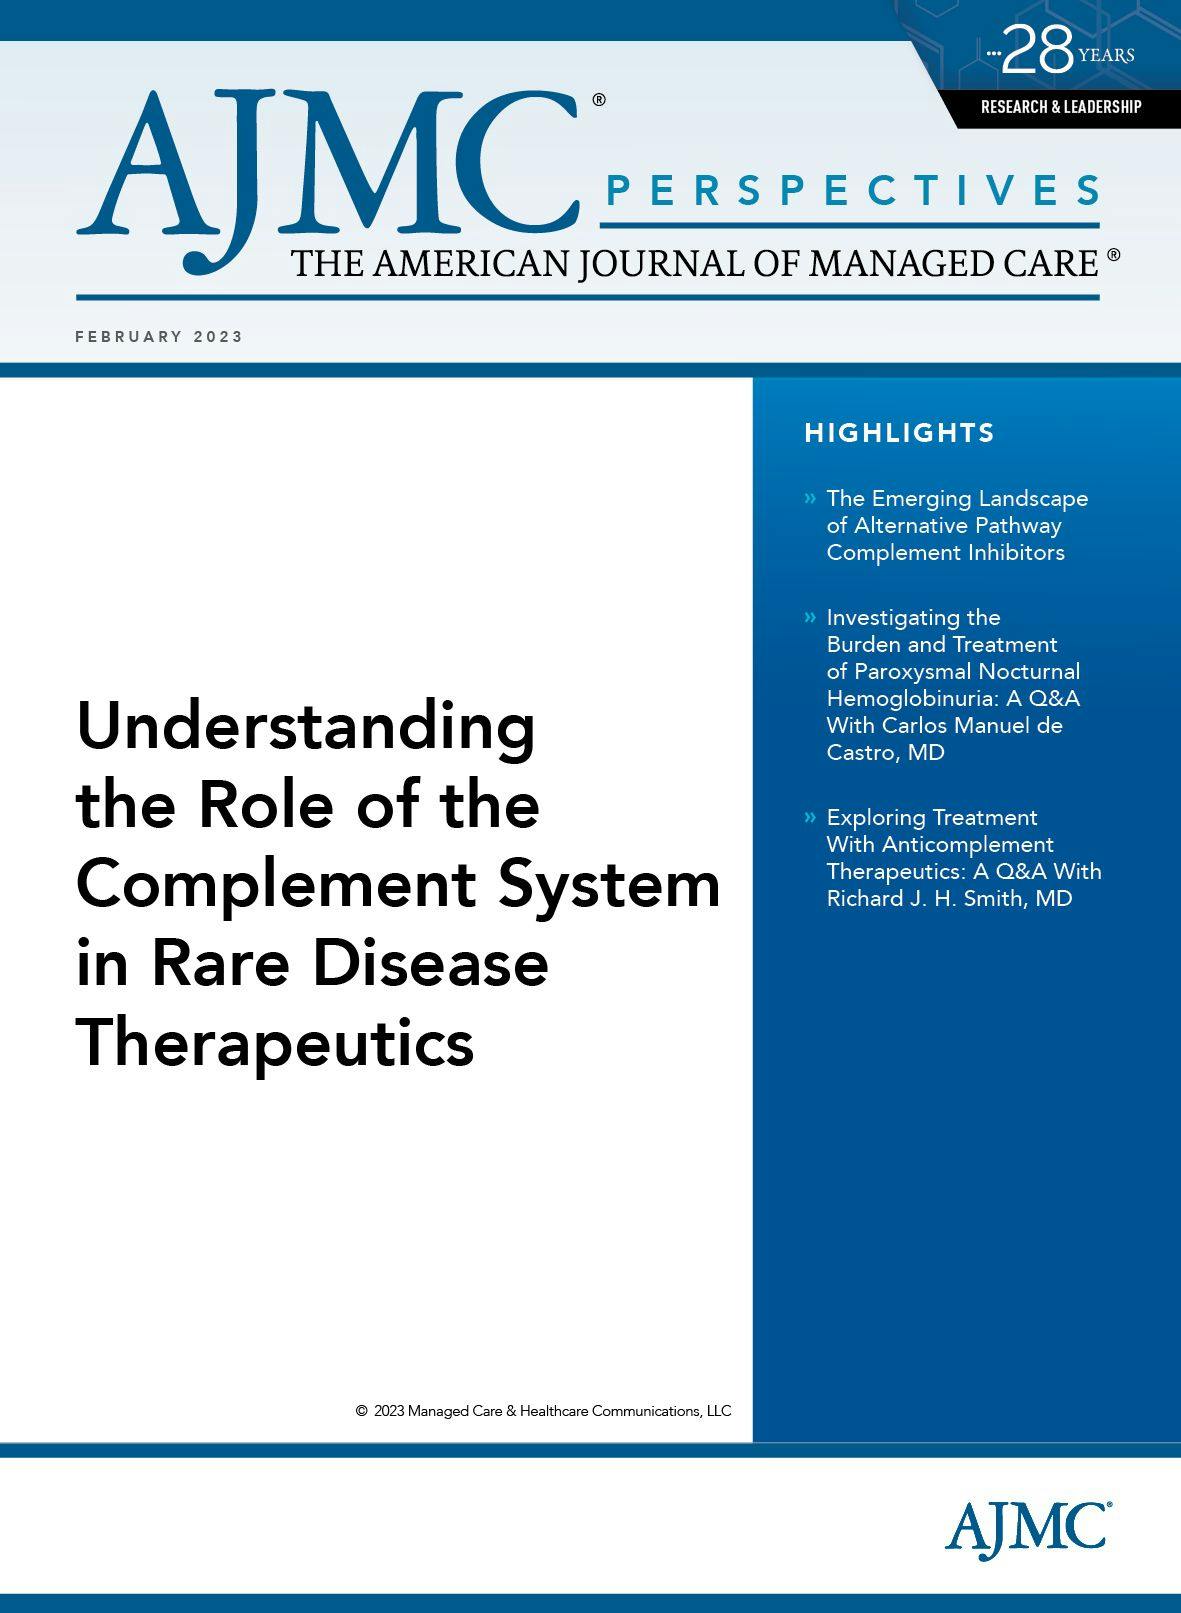 Understanding the Role of the Complement System in Rare Disease Therapeutics